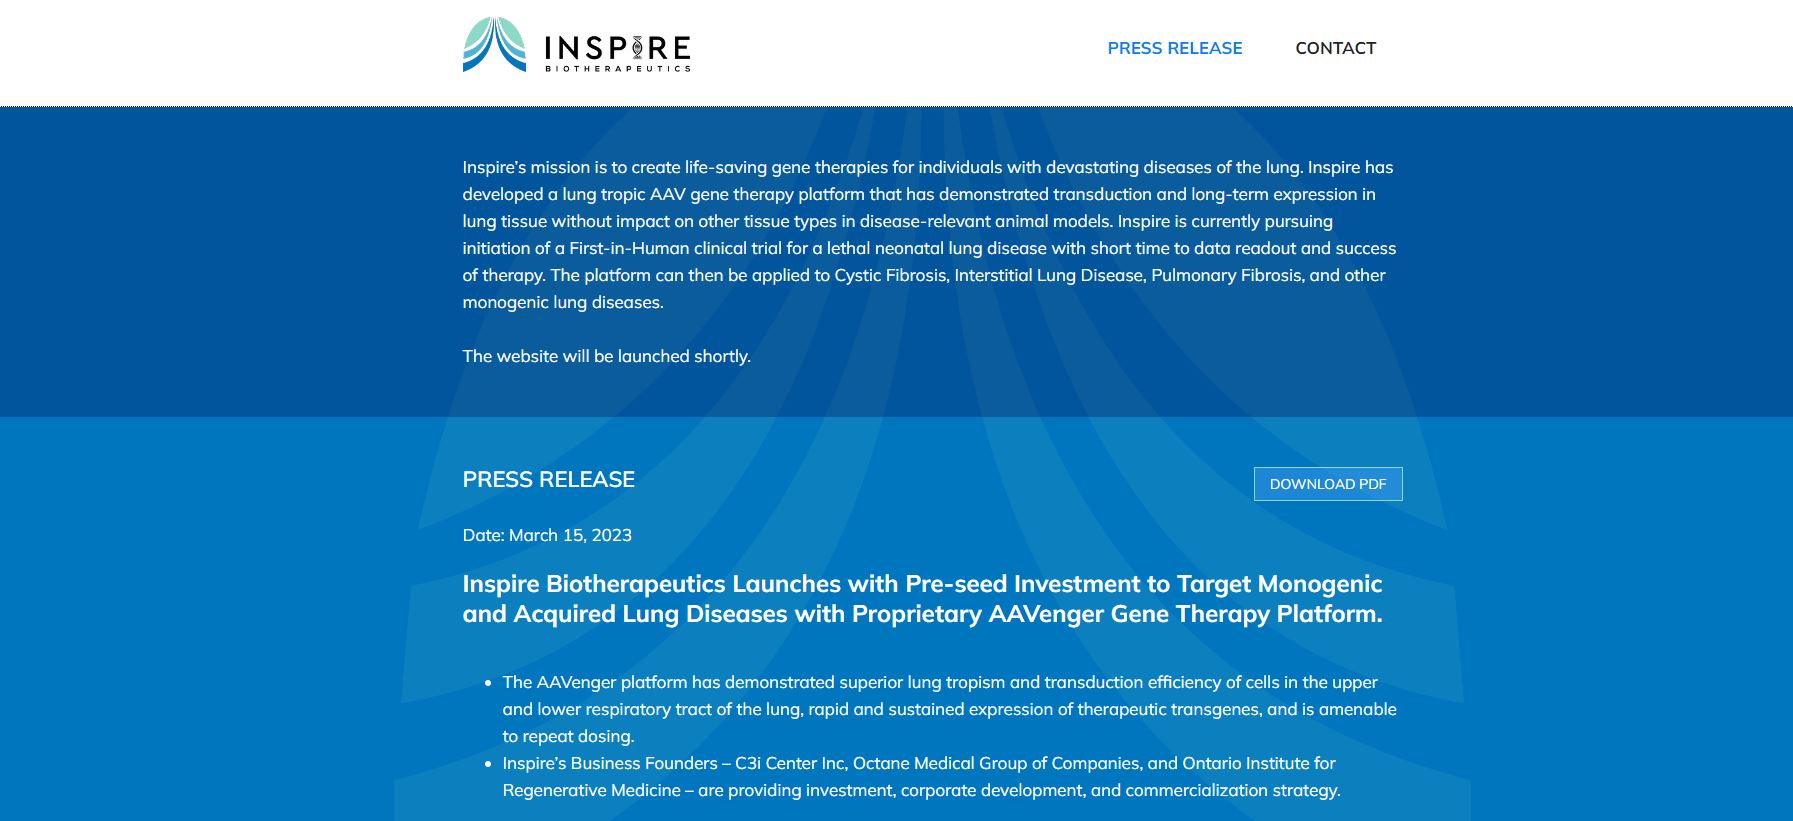 Inspire Biotherapeutics Inc. founded by Sandra Donaldson is a promising biotech startup